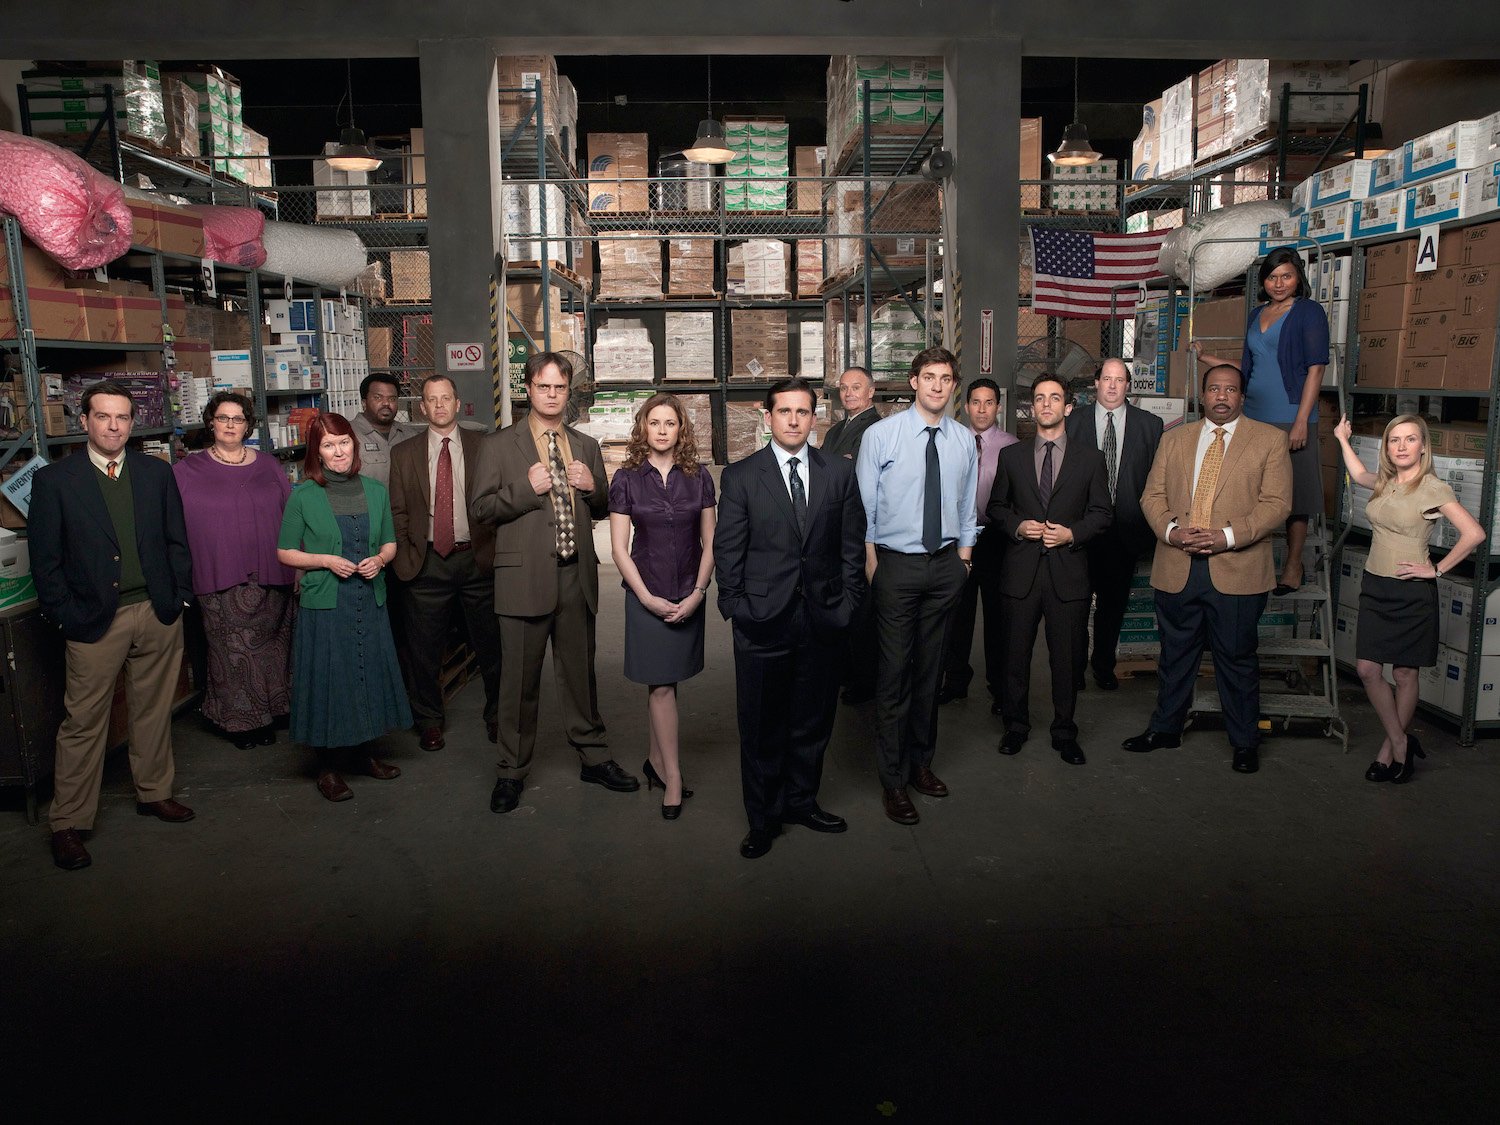 The Office cast